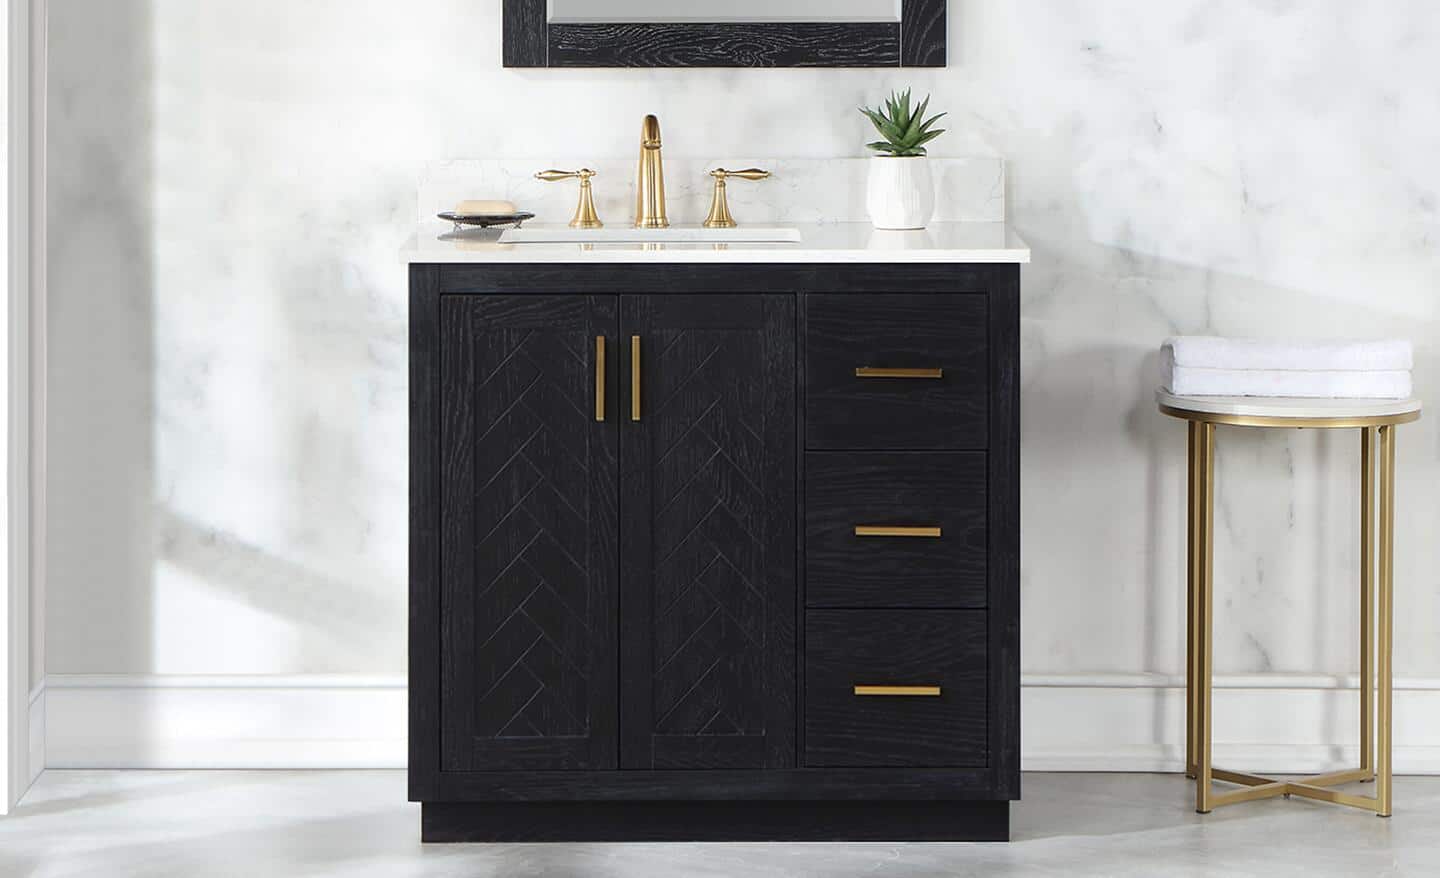 A black bath vanity with gold hardware installed in a small bathroom.